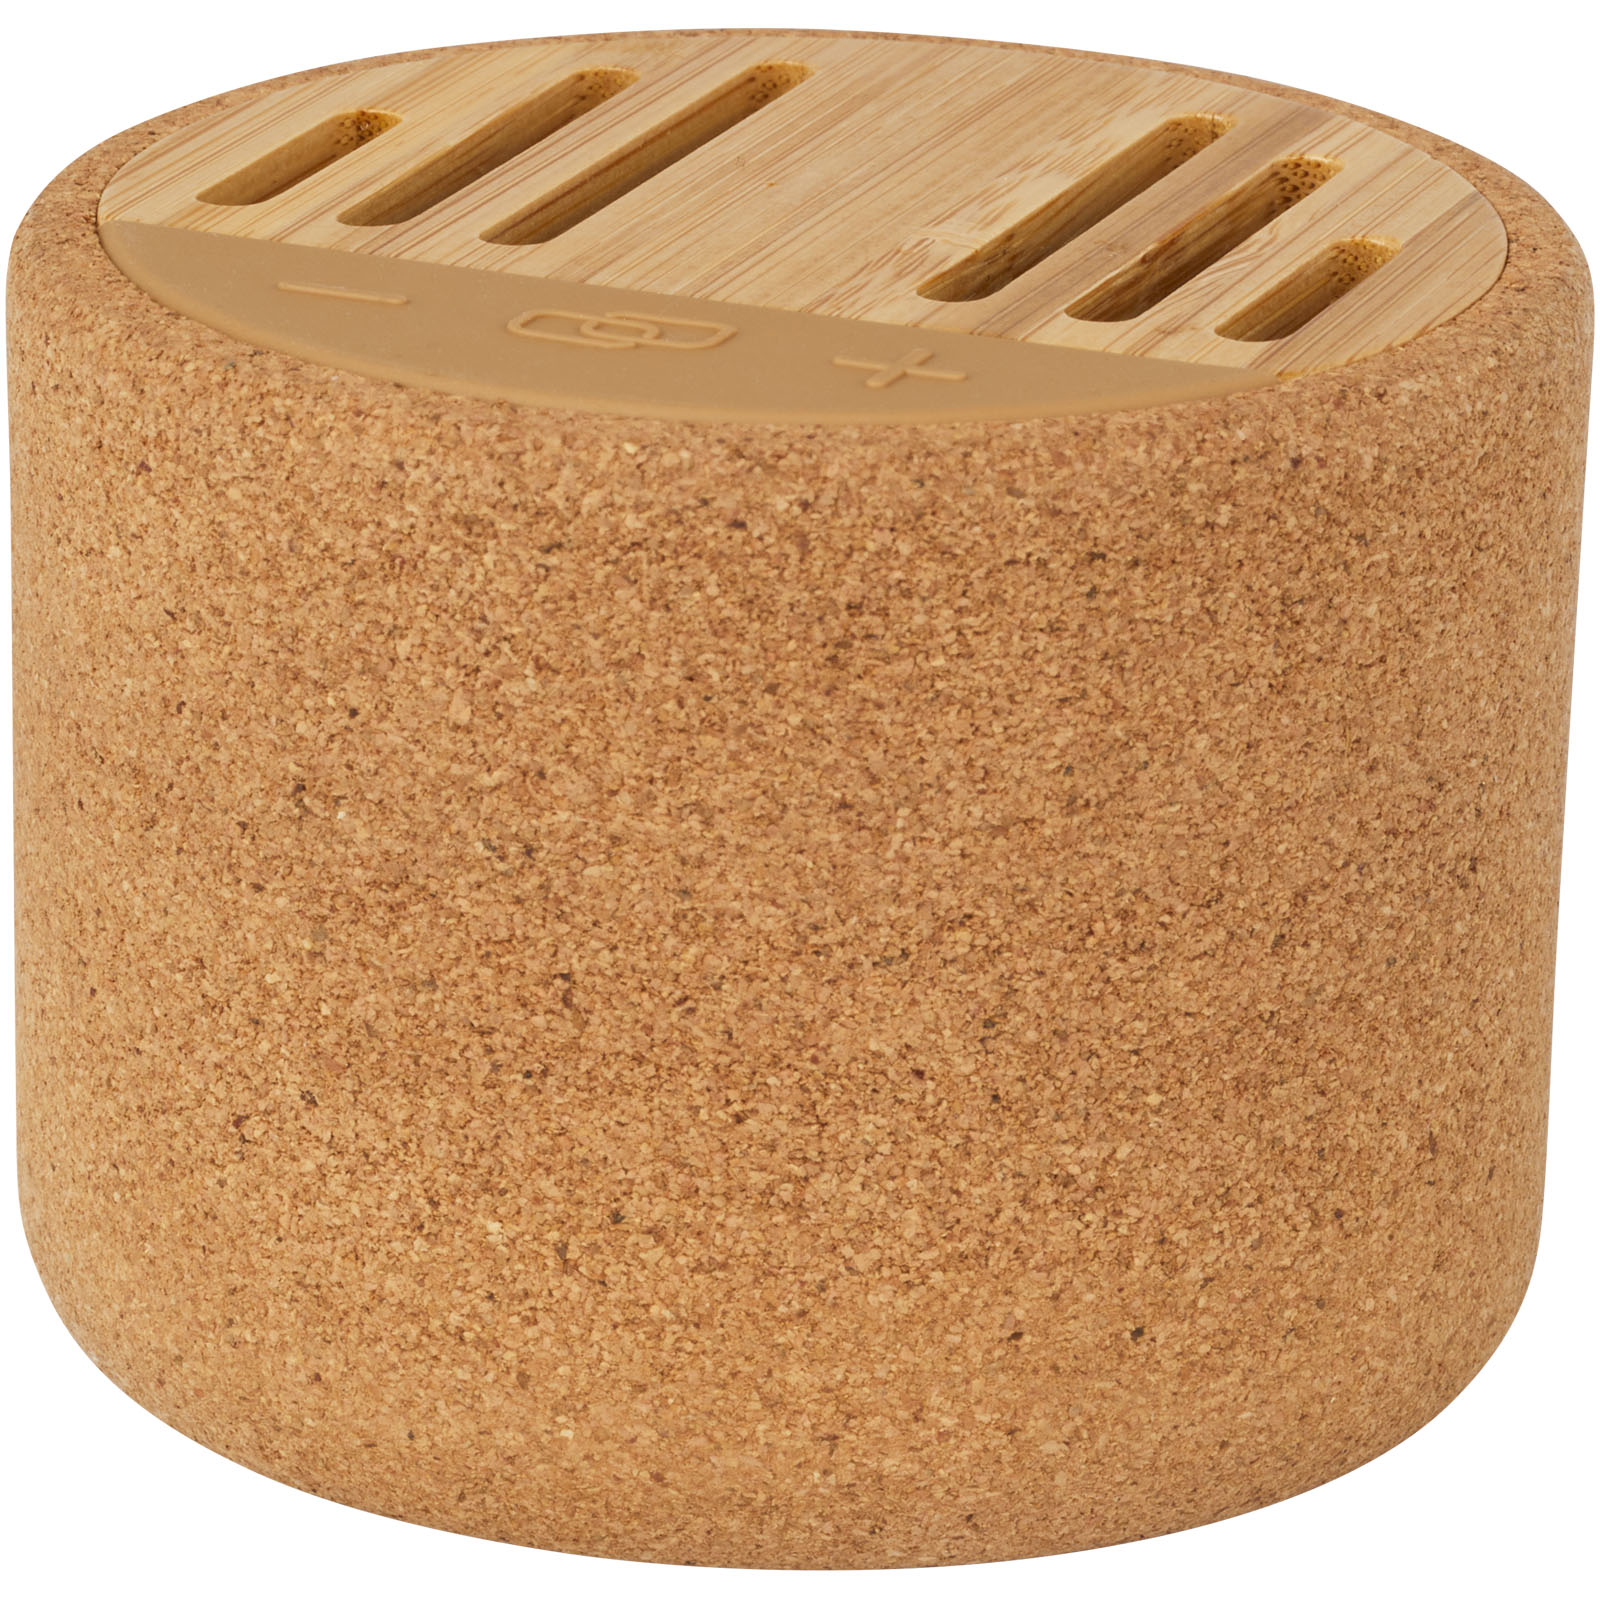 Wireless speaker in cork packaging ACHED - natural